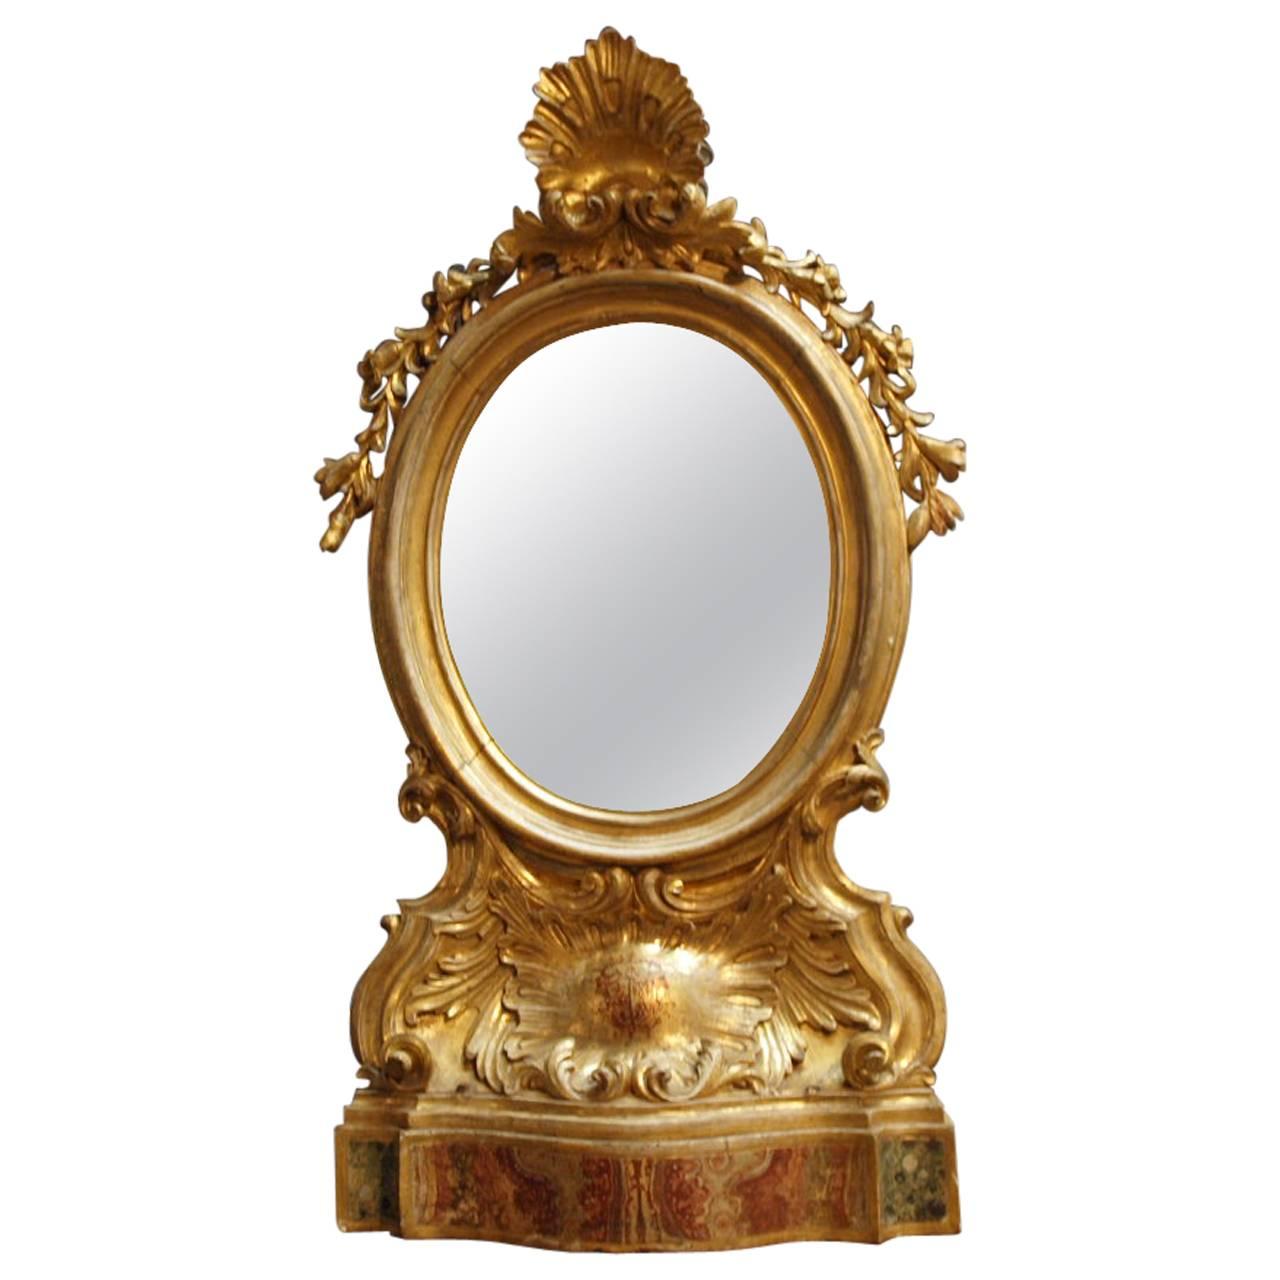 Exceptional 18th Century Italian Altar Frame Mirror For Sale